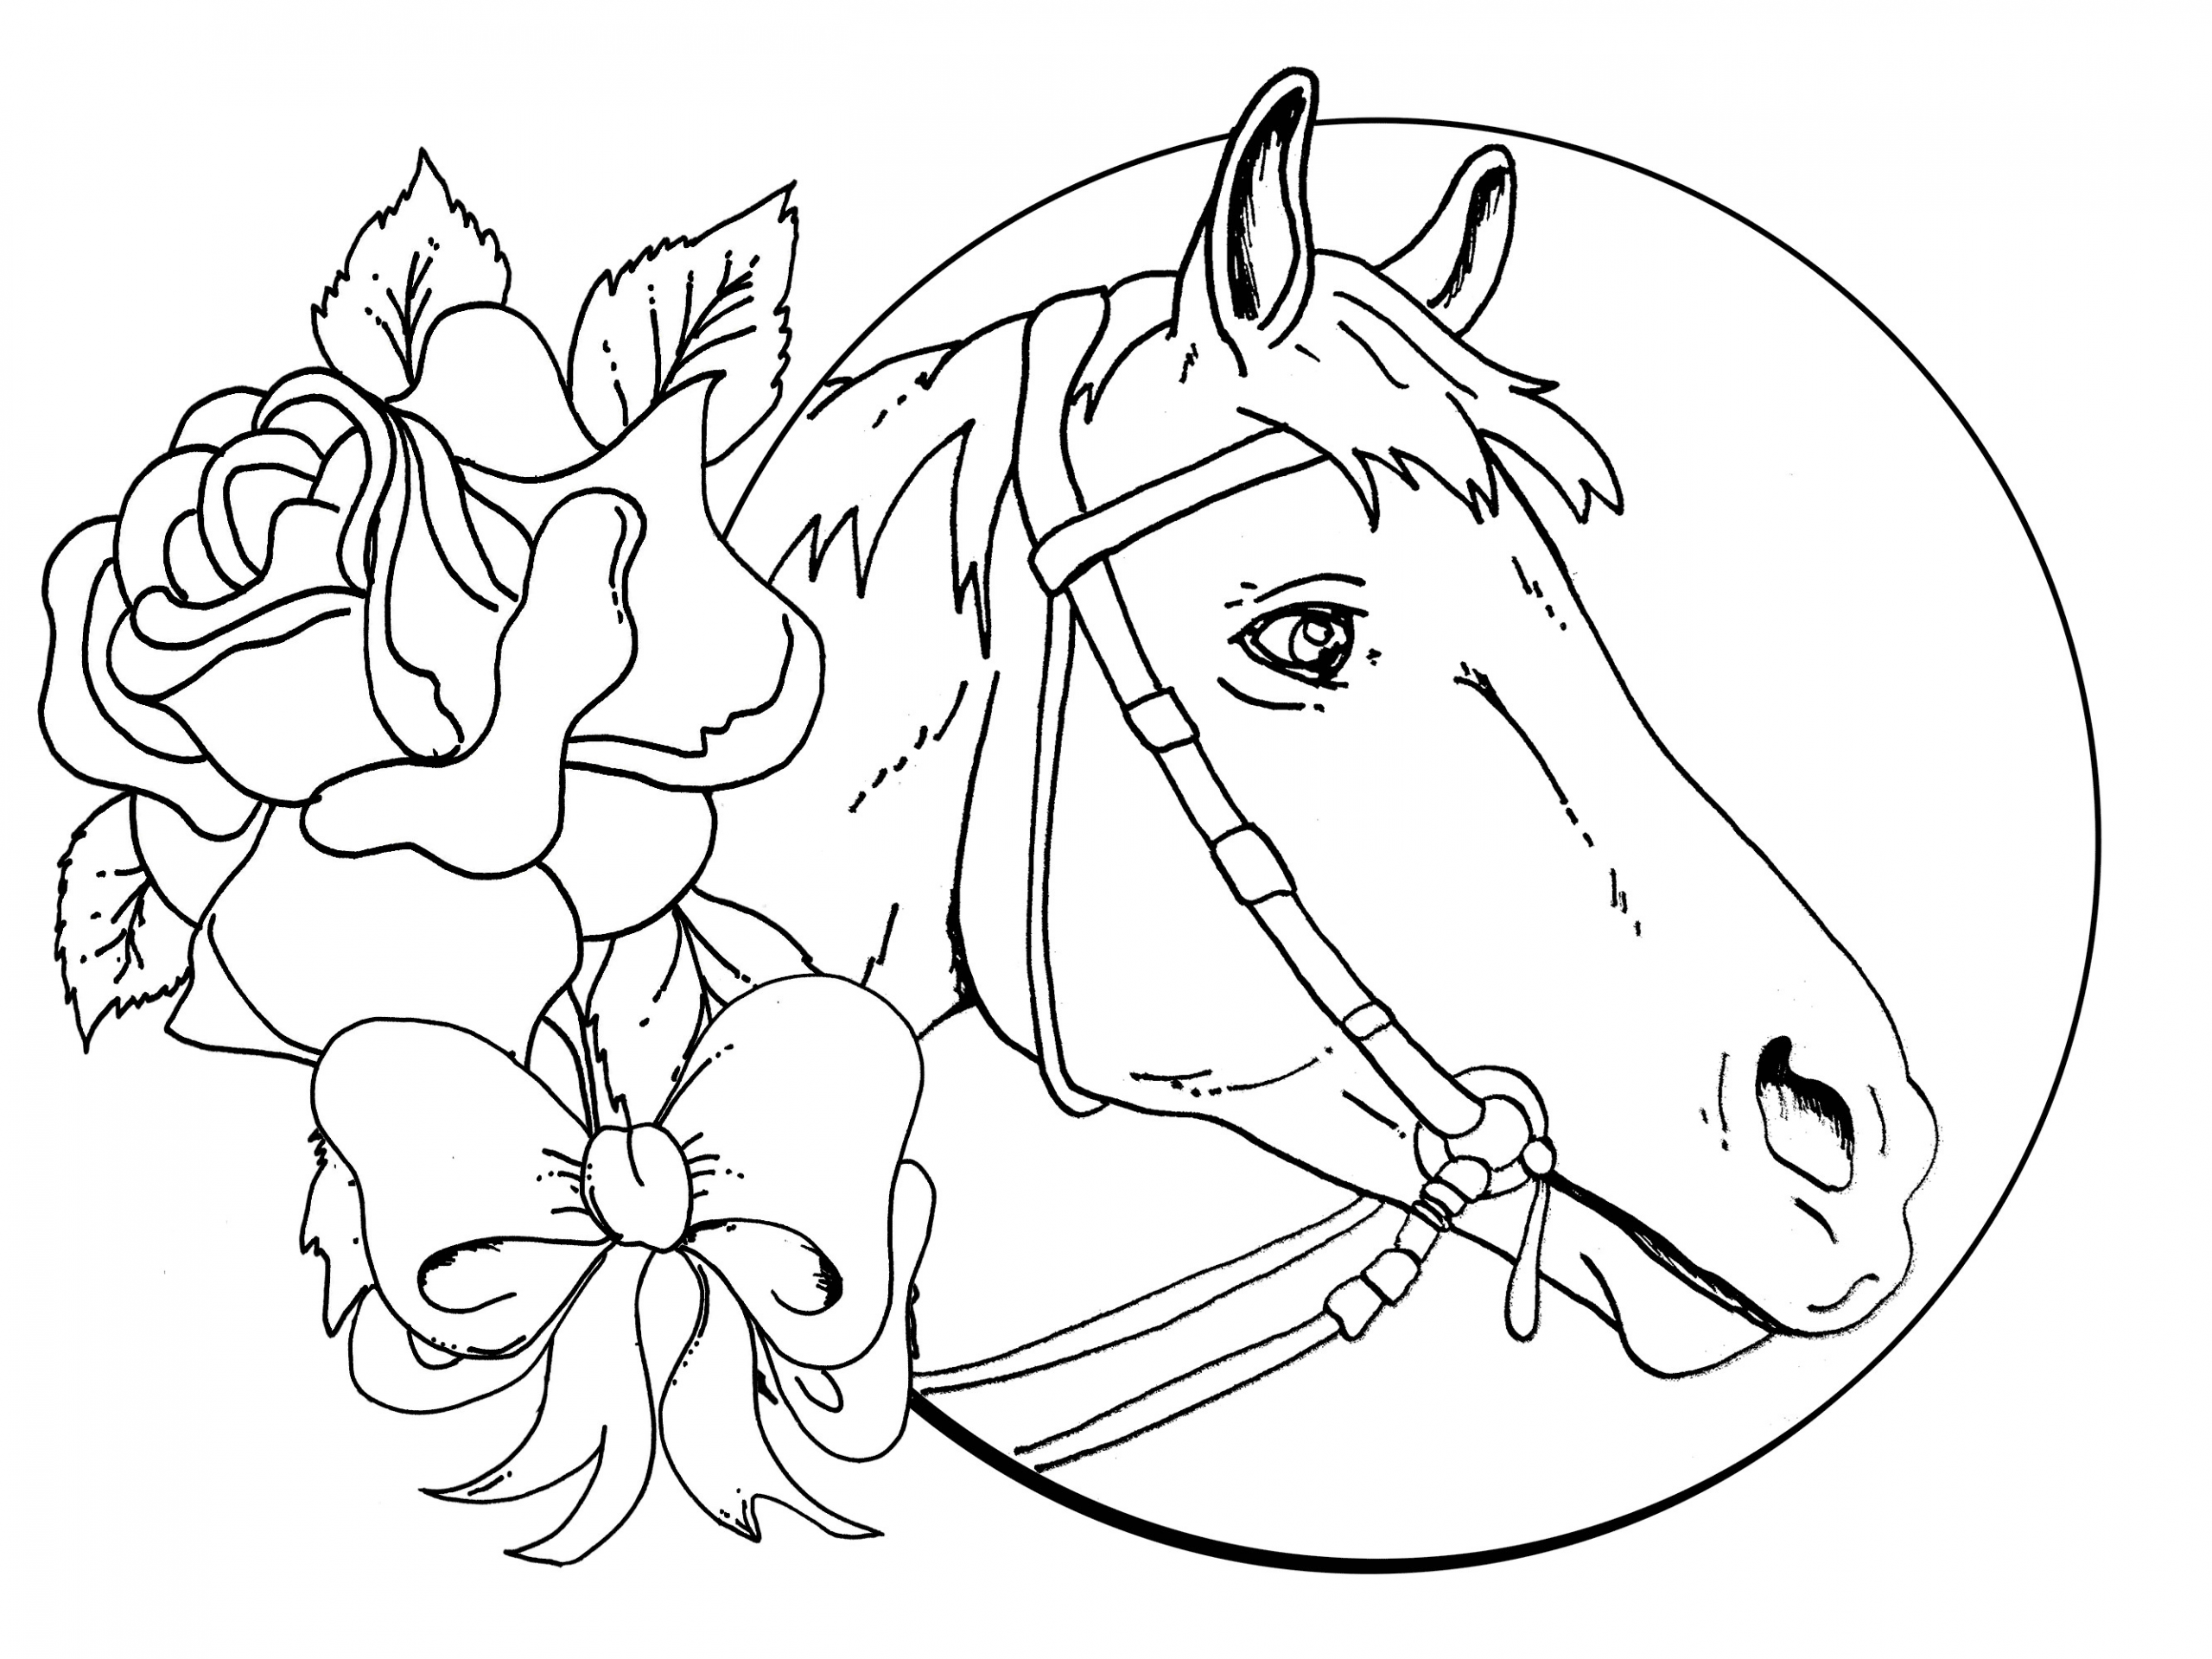 Coloring Pages For Girls Teens
 45 Free Coloring Pages for Teens